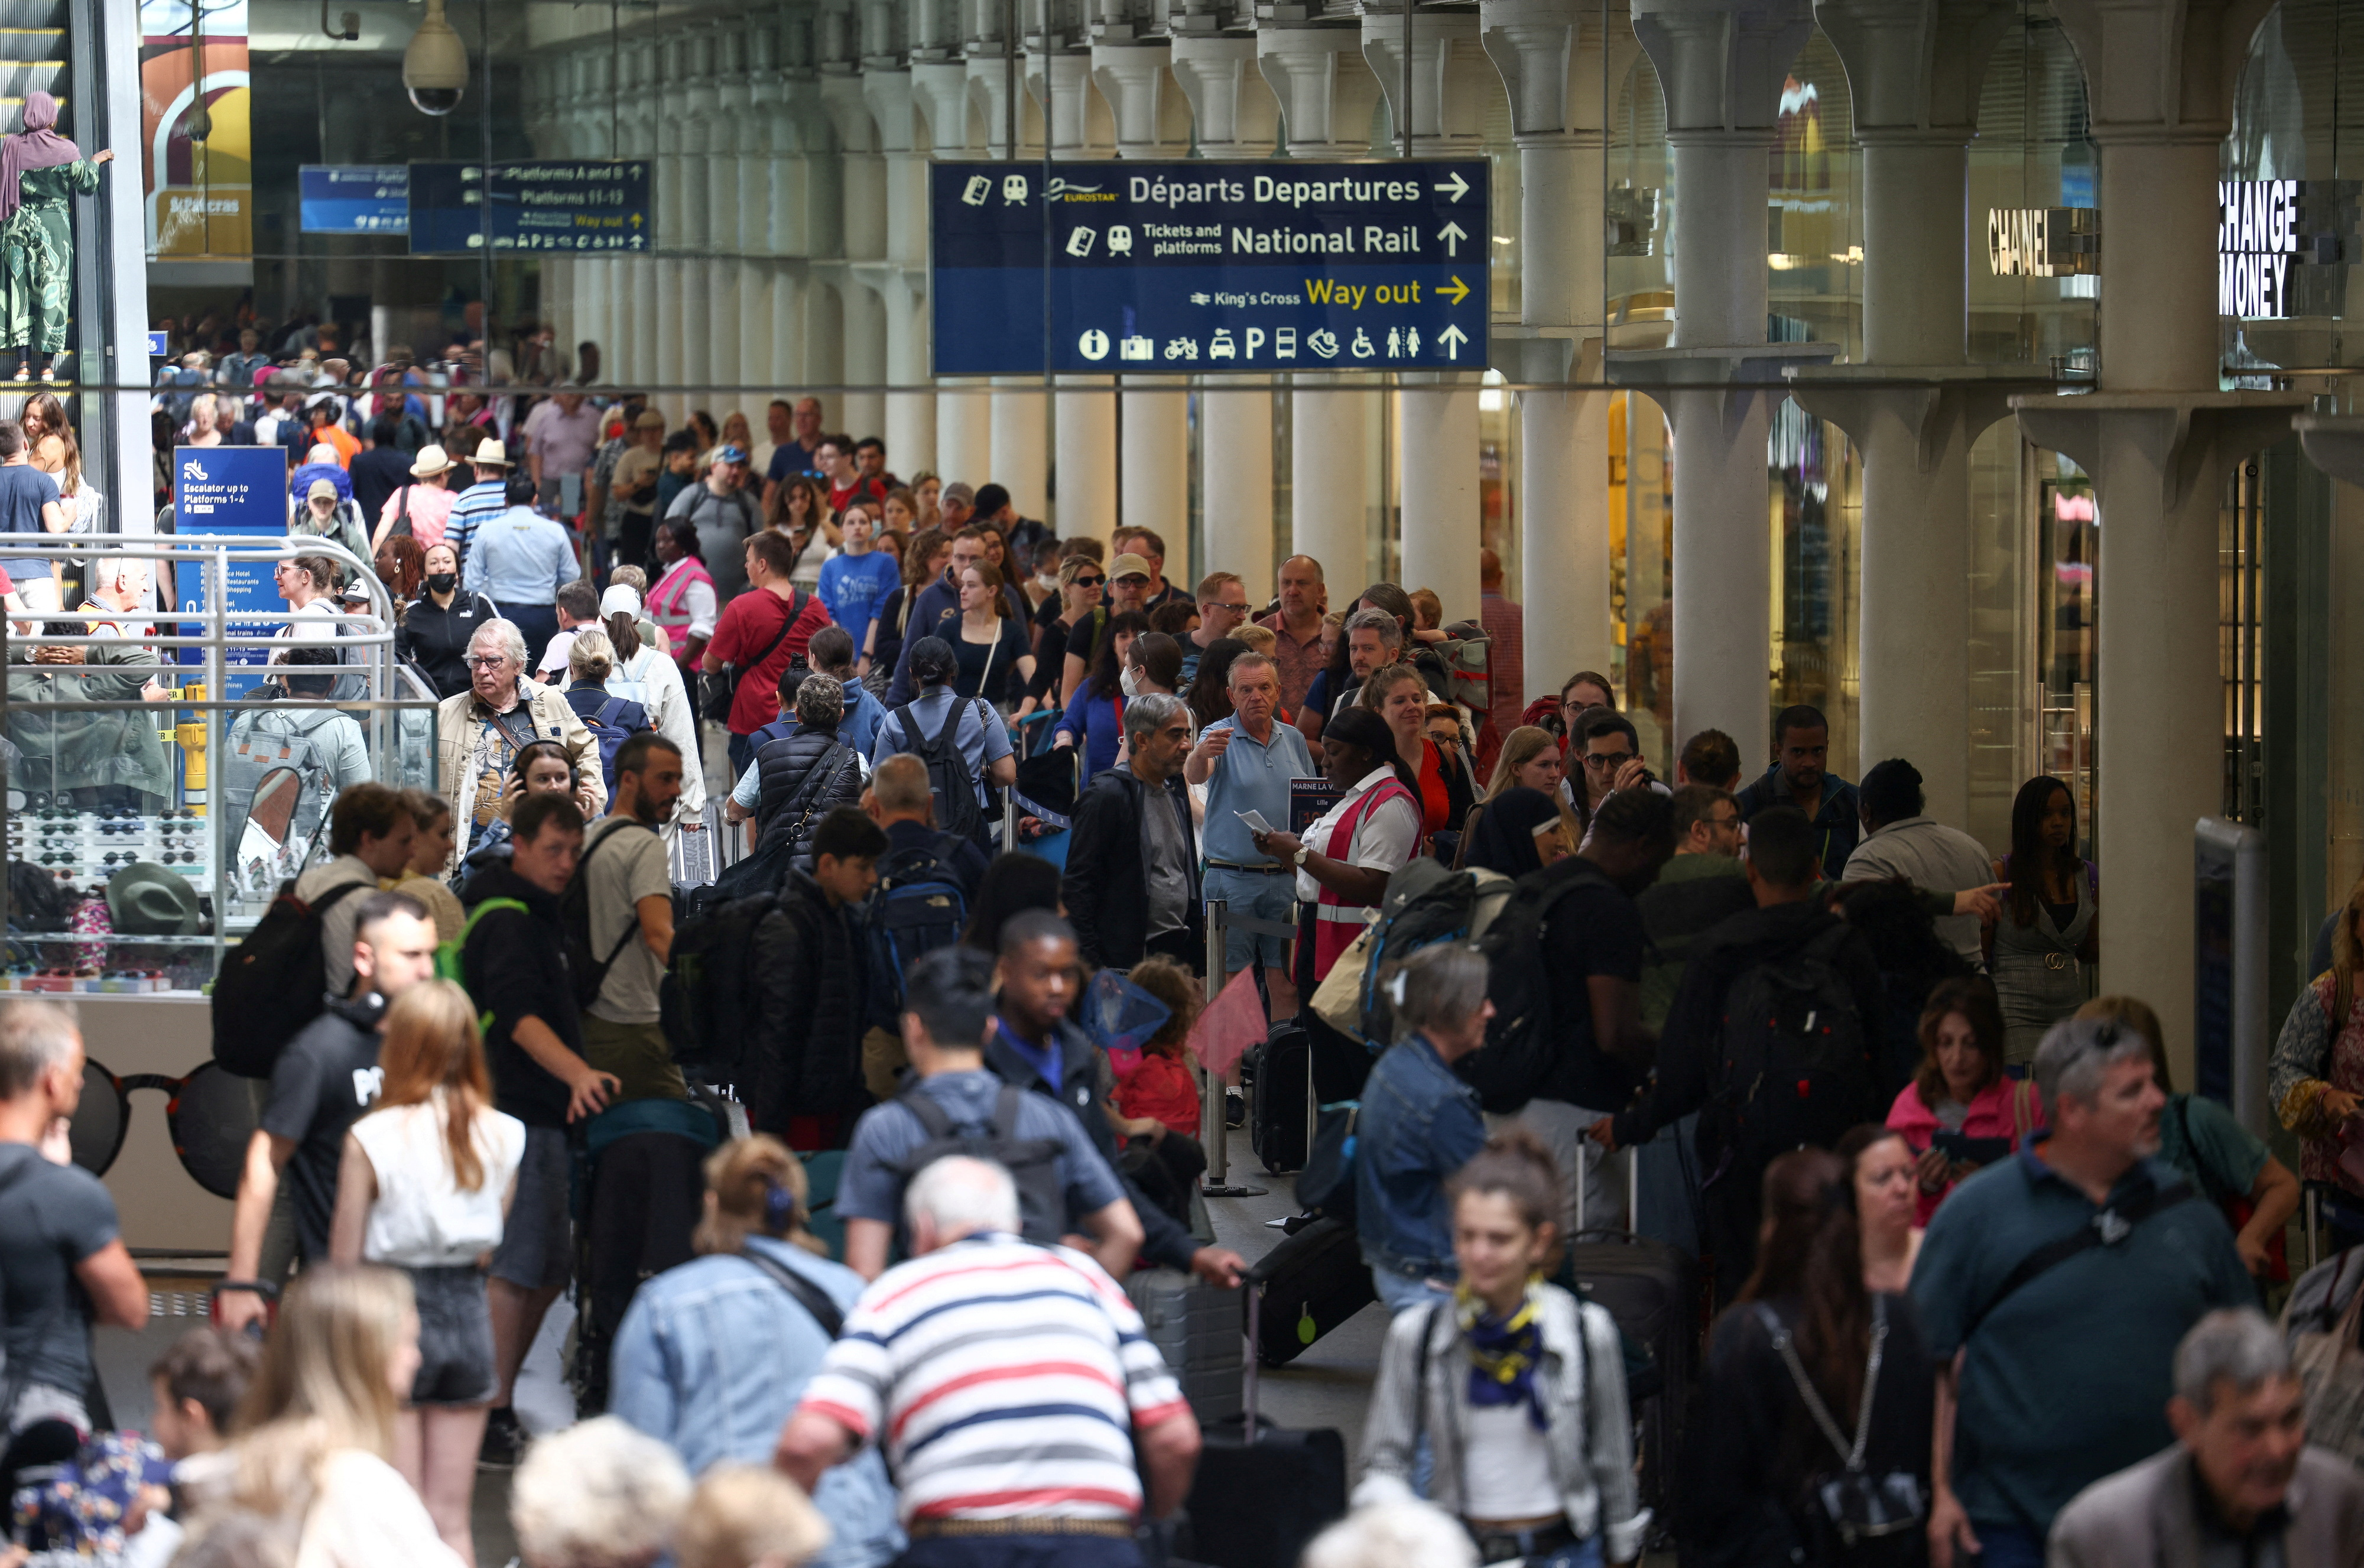 Eurostar London terminal capacity down % after Brexit, says CEO